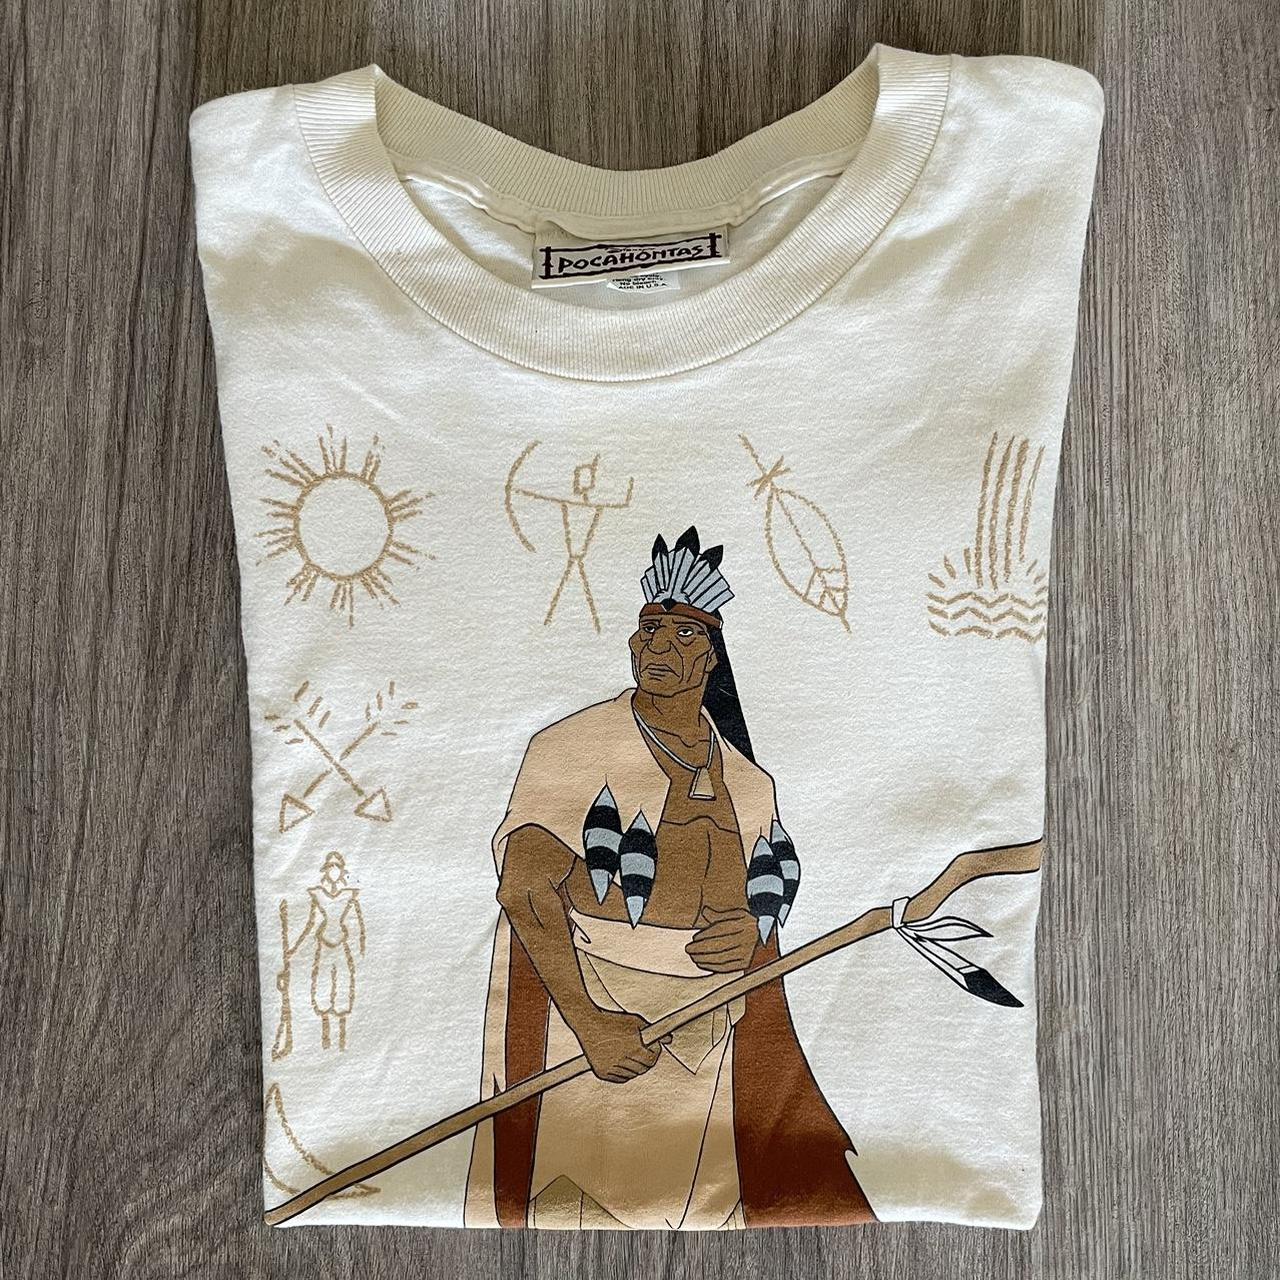 90s Pocahontas movie promo shirt Size doesn't say... - Depop